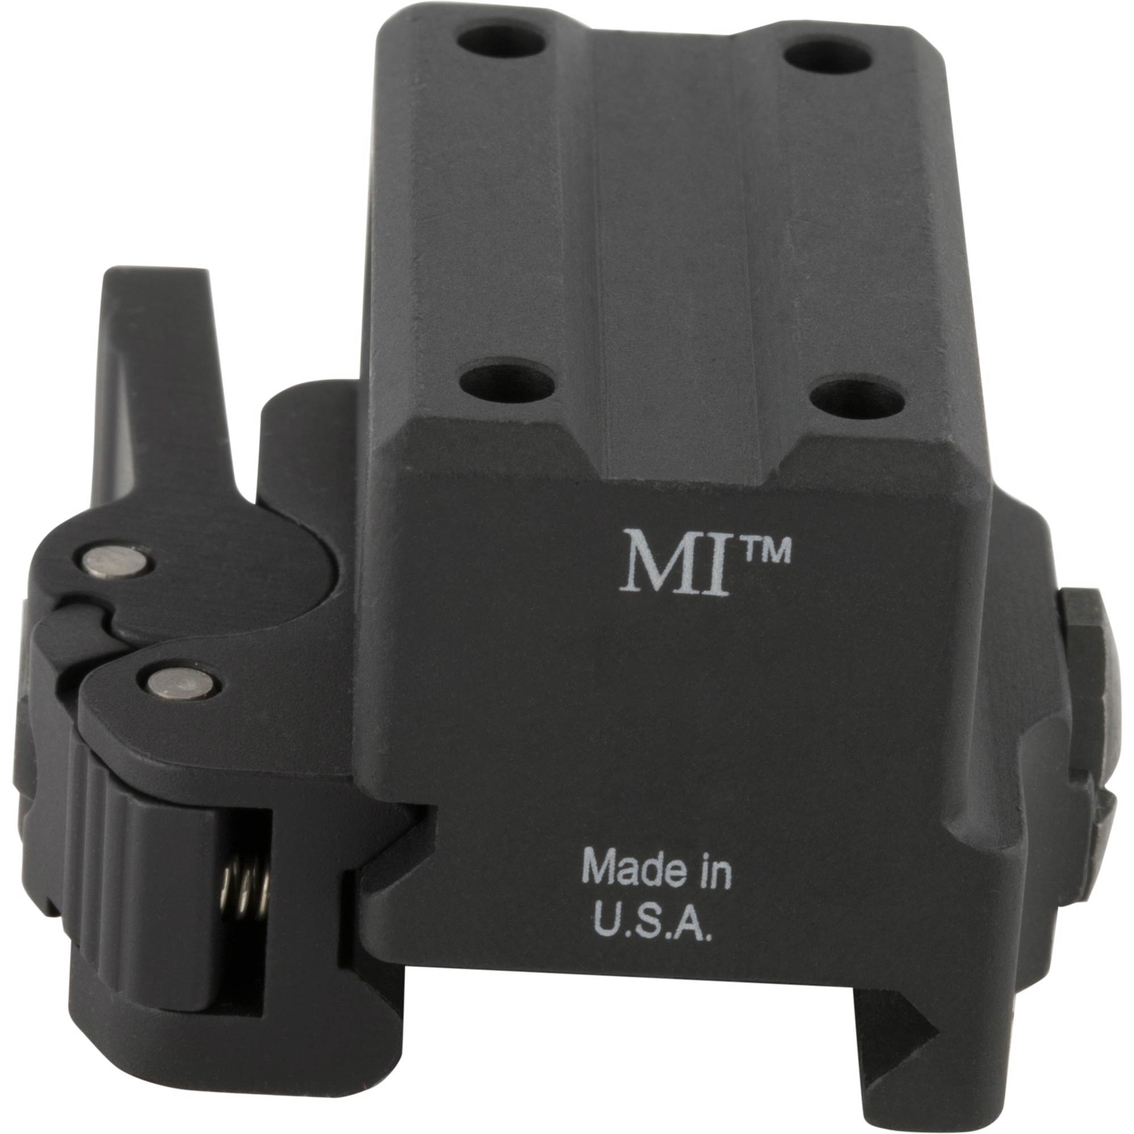 Midwest Industries Trijicon MRO Lower 1/3 QD Mount - Image 2 of 2